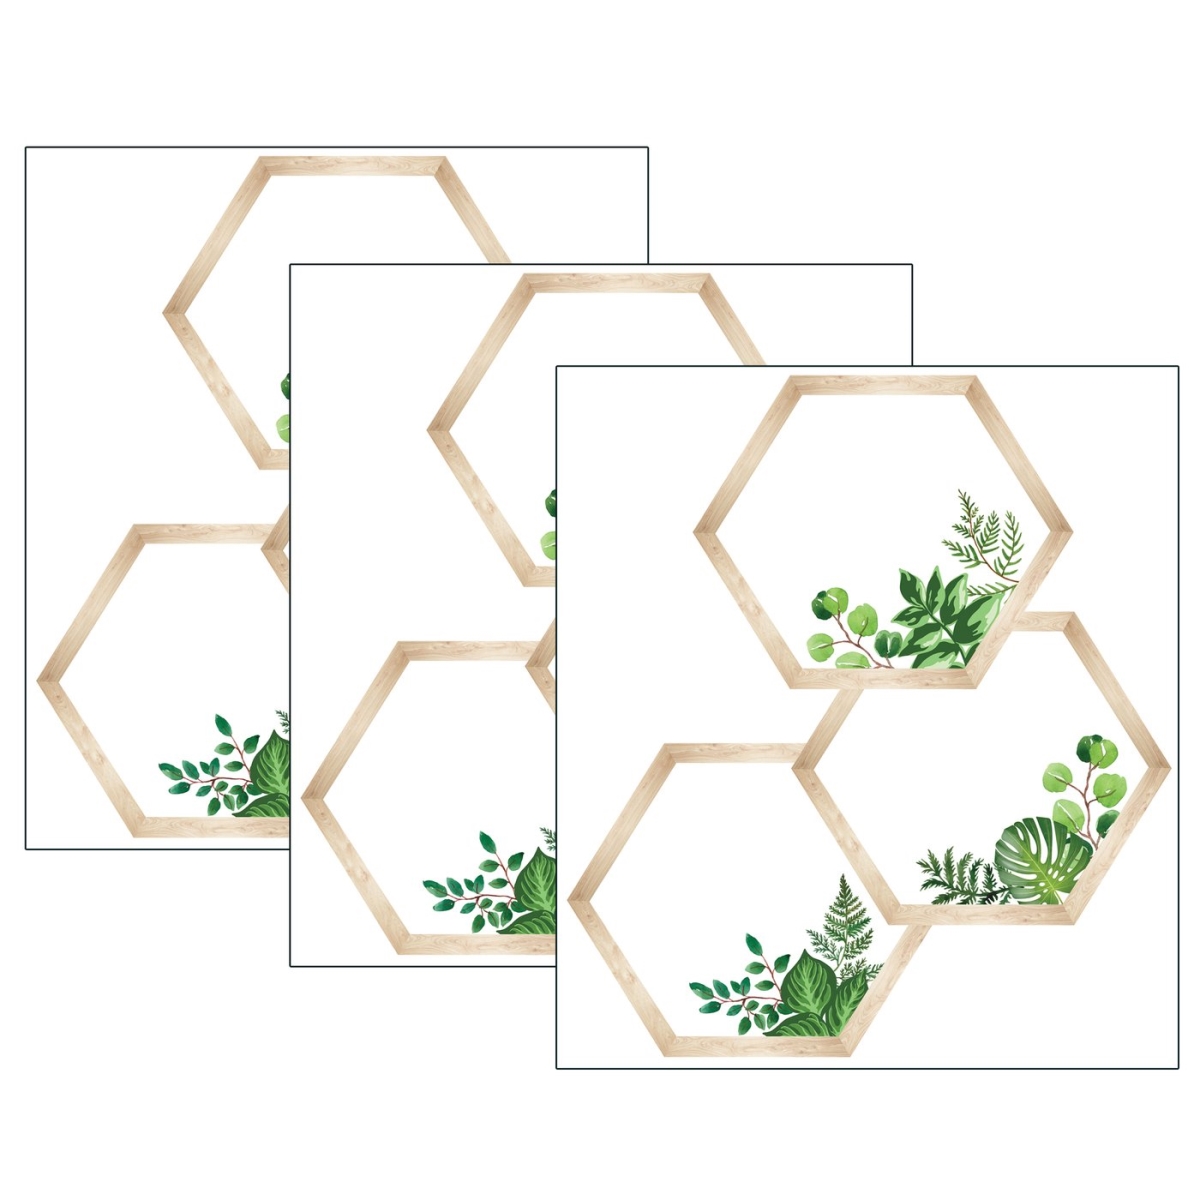 Picture of Carson Dellosa Education CD-120612-3 Simply Boho Hexagons Cut Outs - Pack of 3